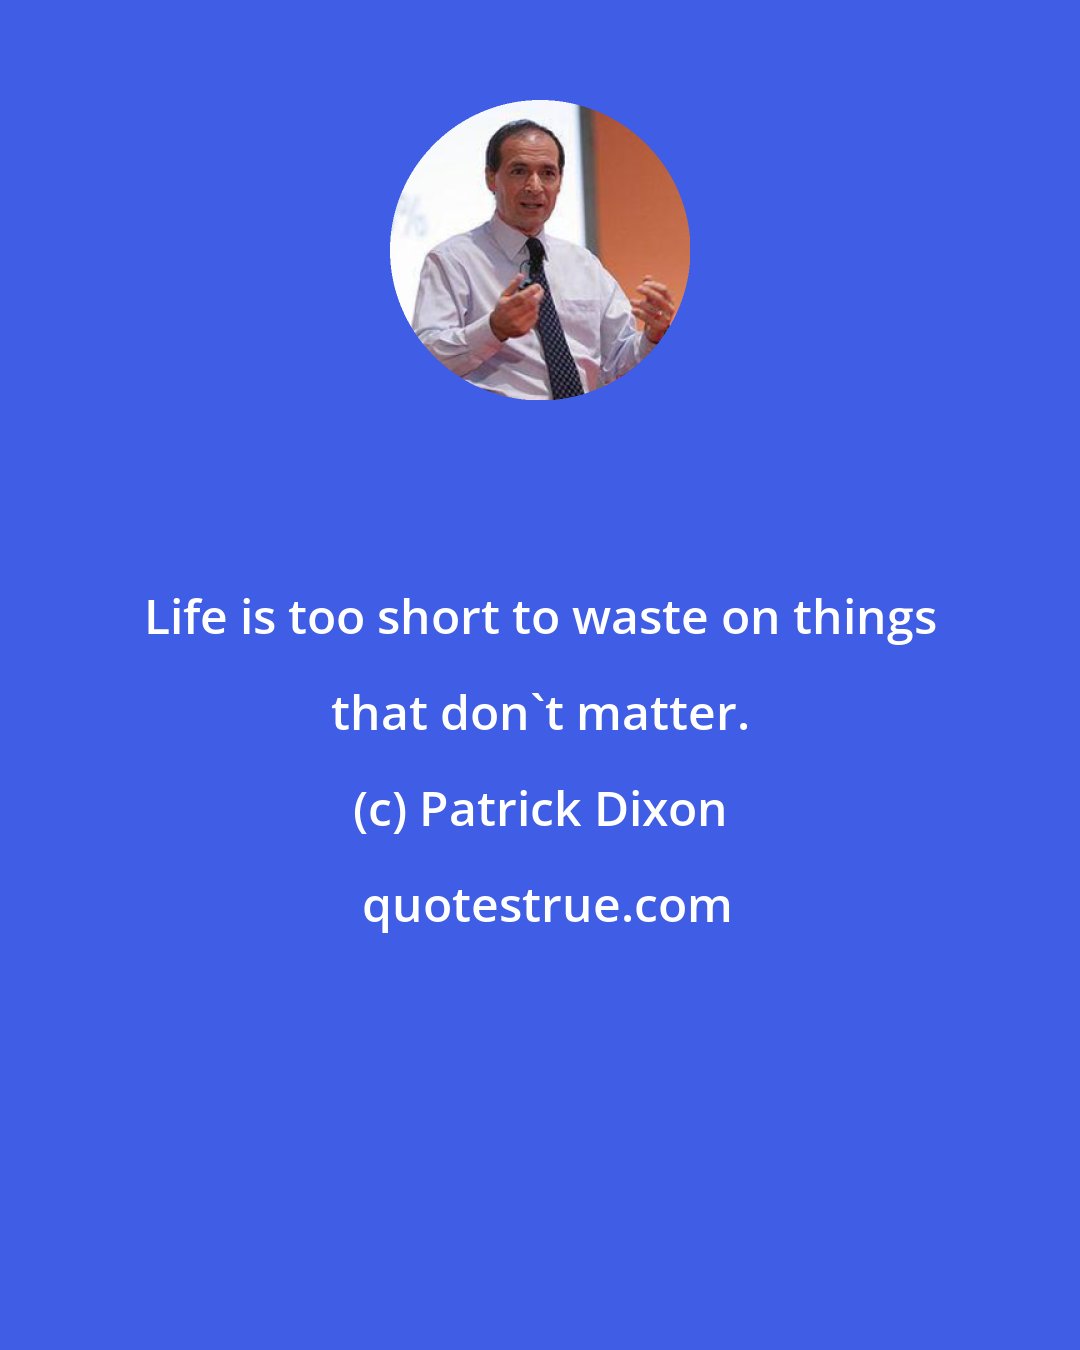 Patrick Dixon: Life is too short to waste on things that don't matter.